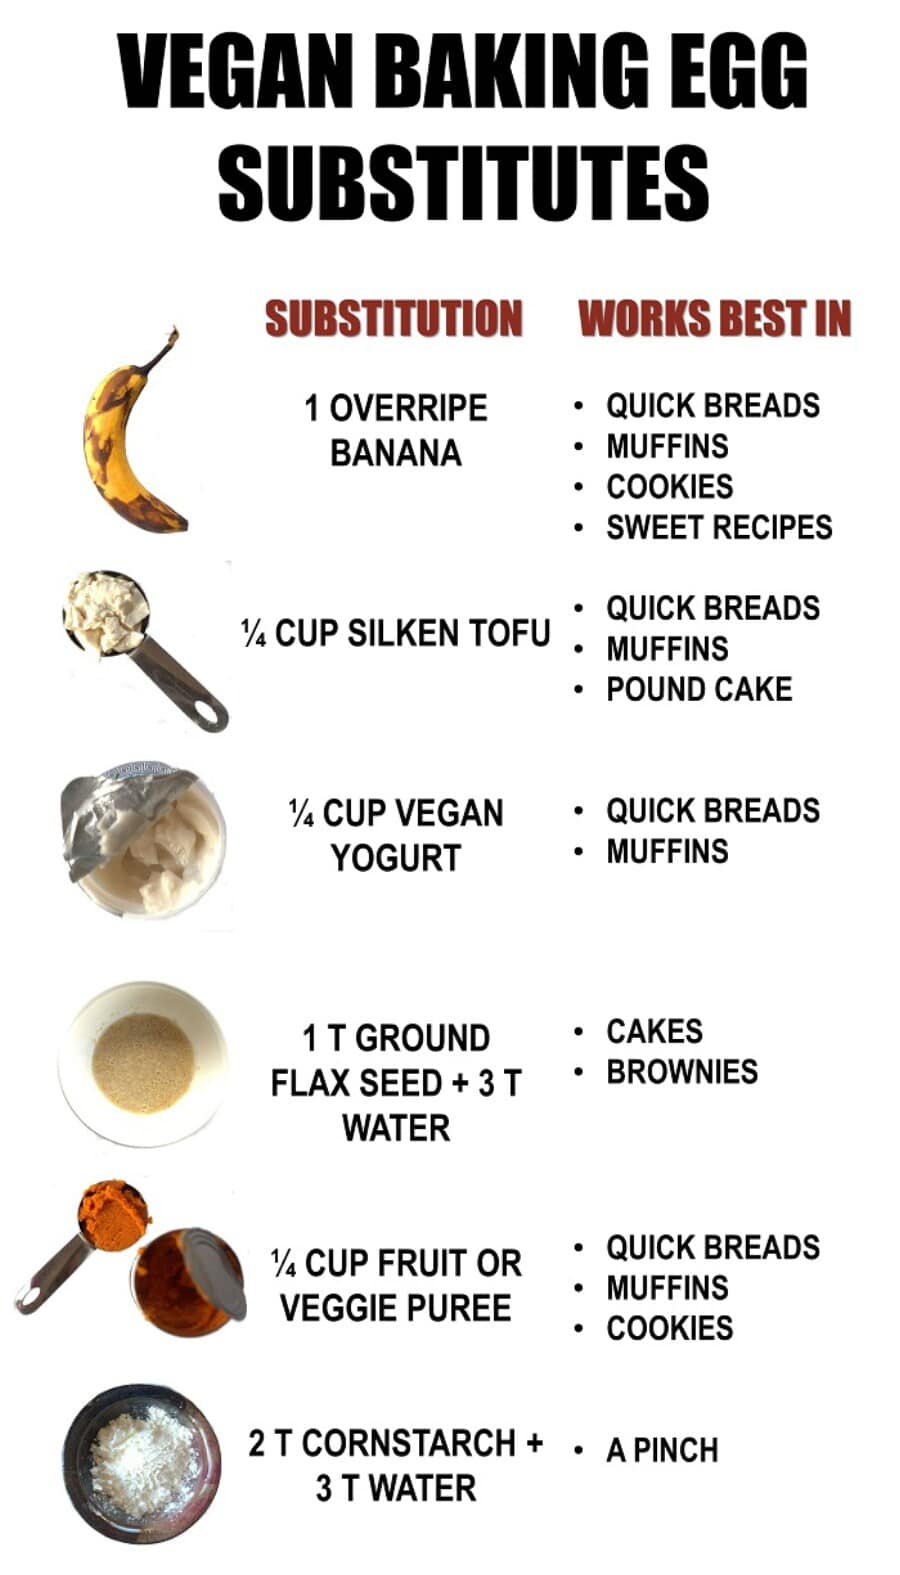 7. Replace your eggs for vegan baking.